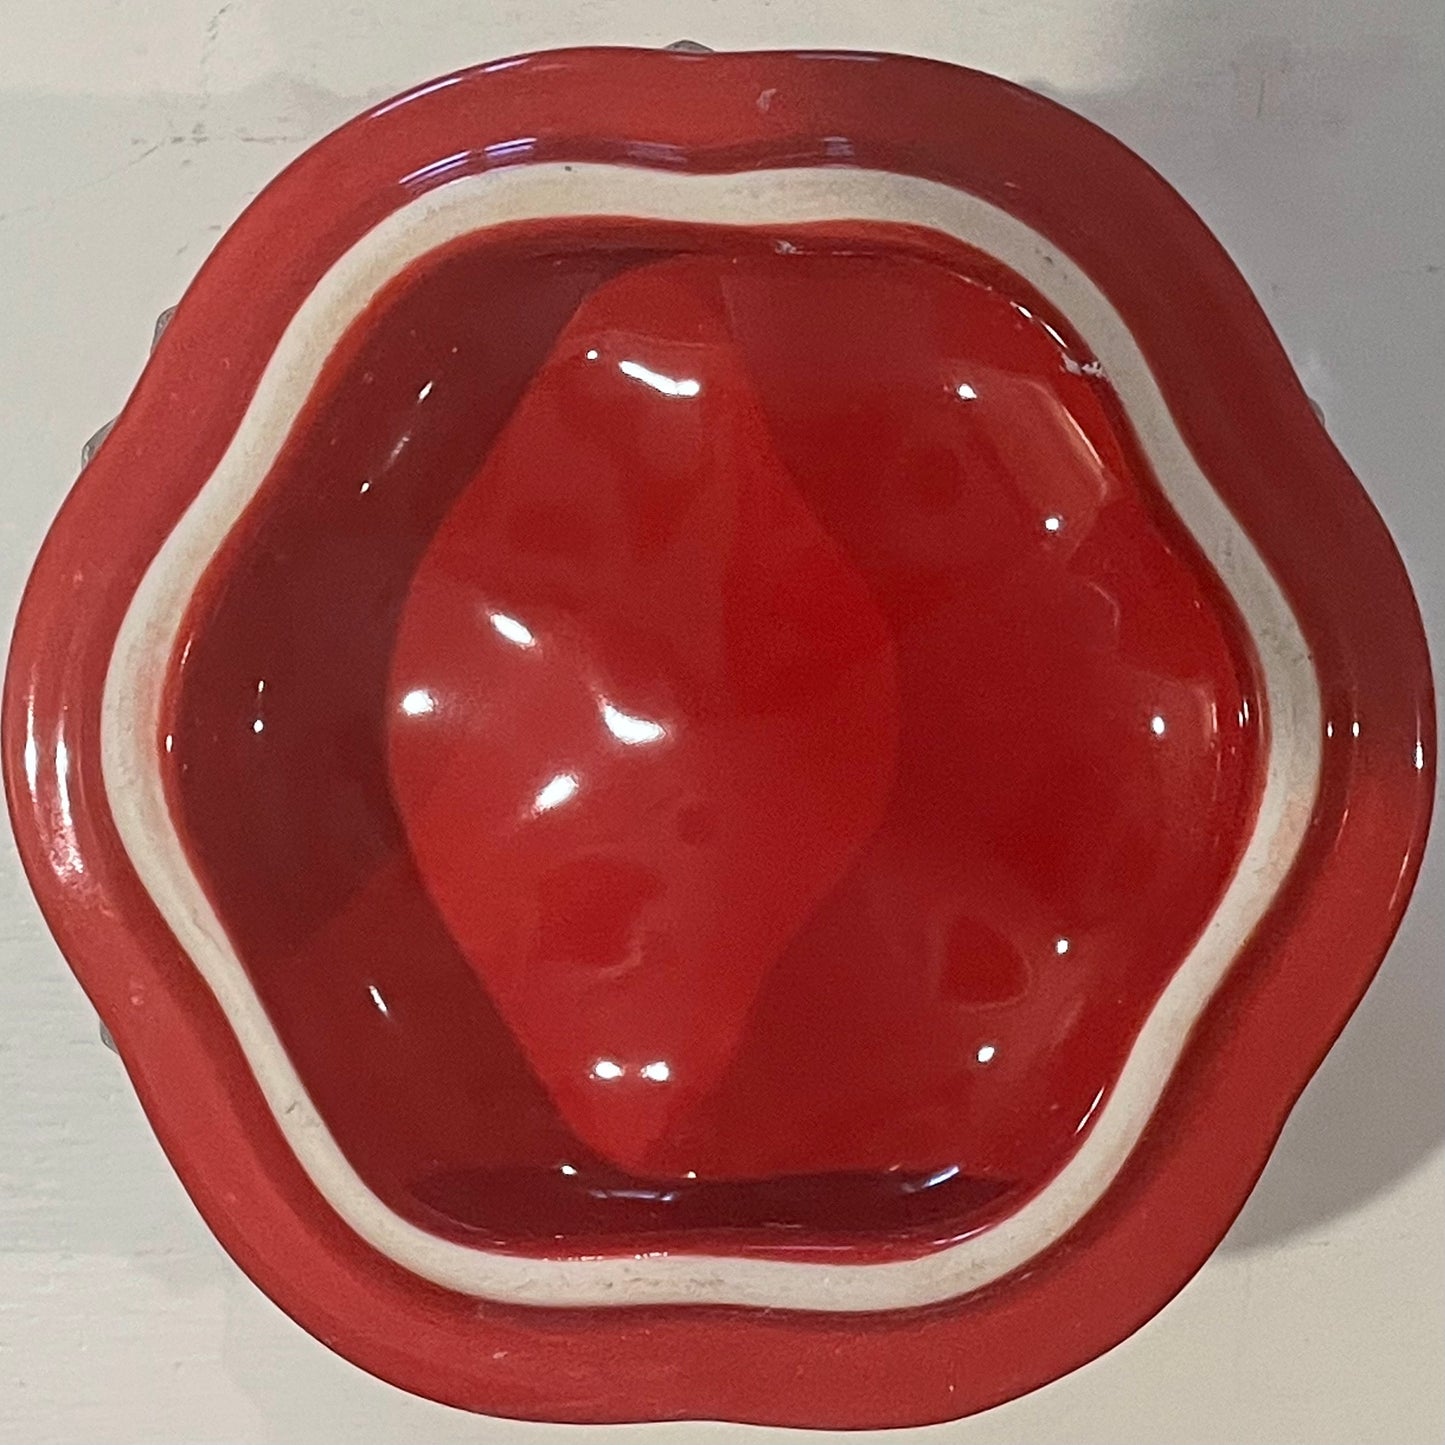 60s-70s MCM Crystal Bowl with Tomato Red Lid